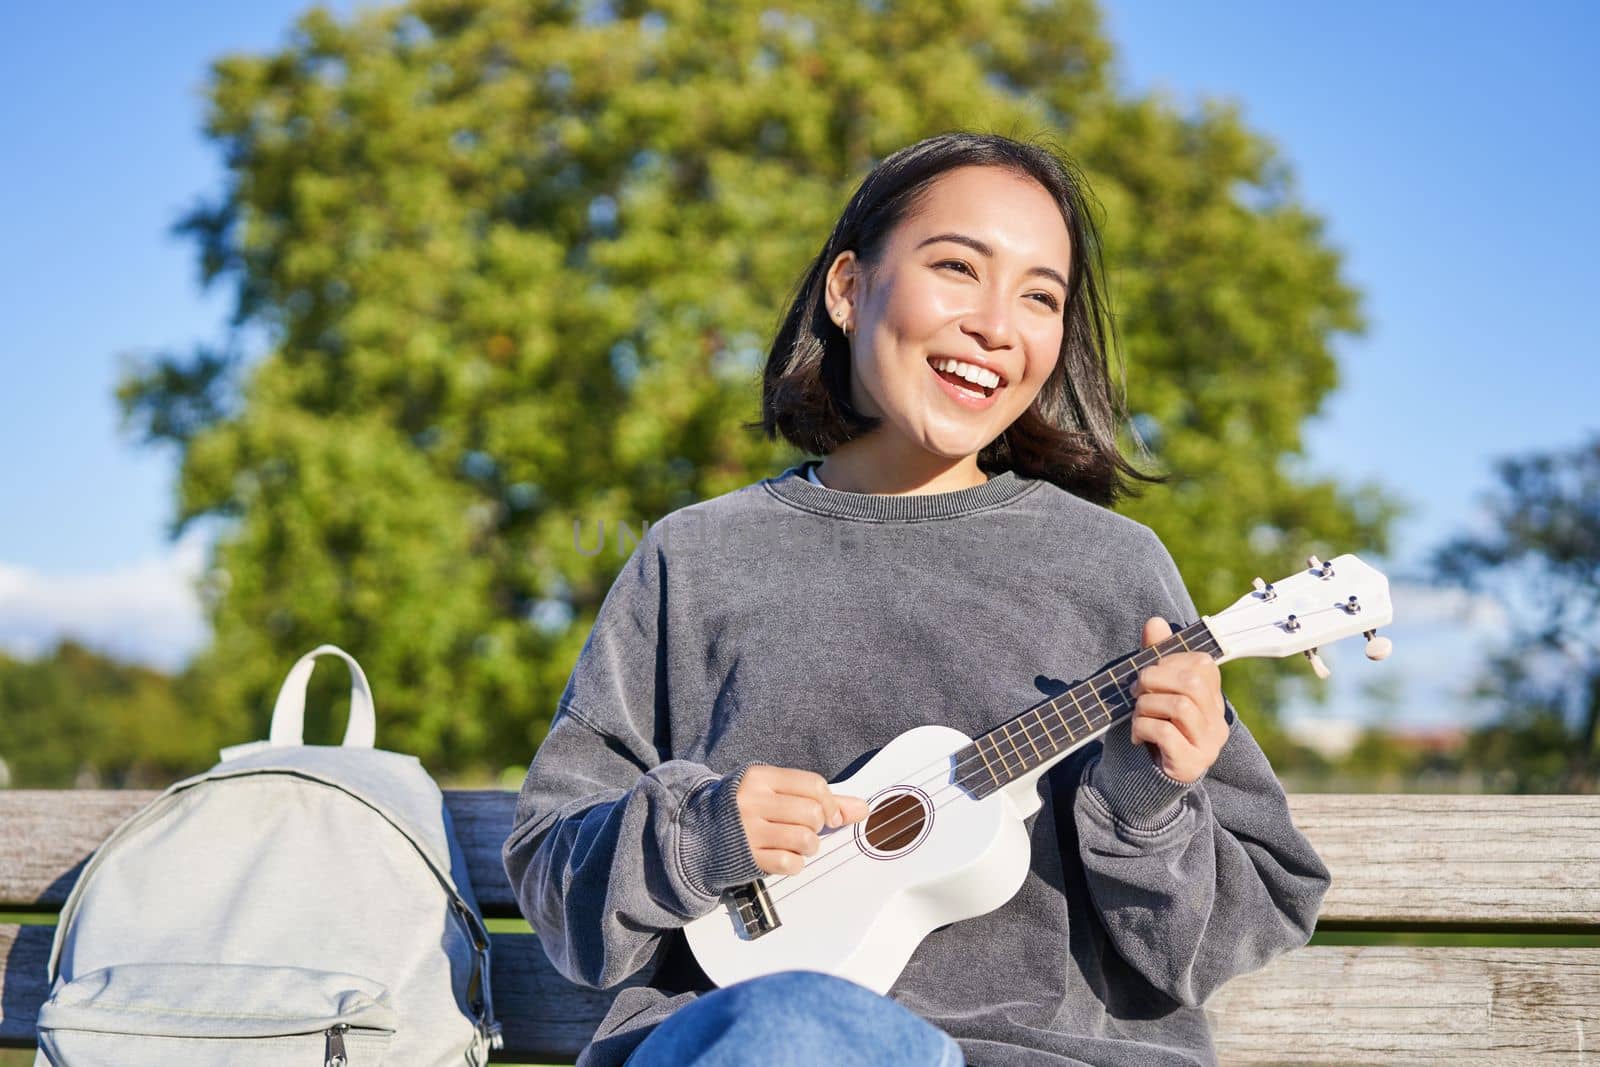 Lovely young woman sitting with backpack on bench in sunny park, plays ukulele guitar and sings along. Lifestyle